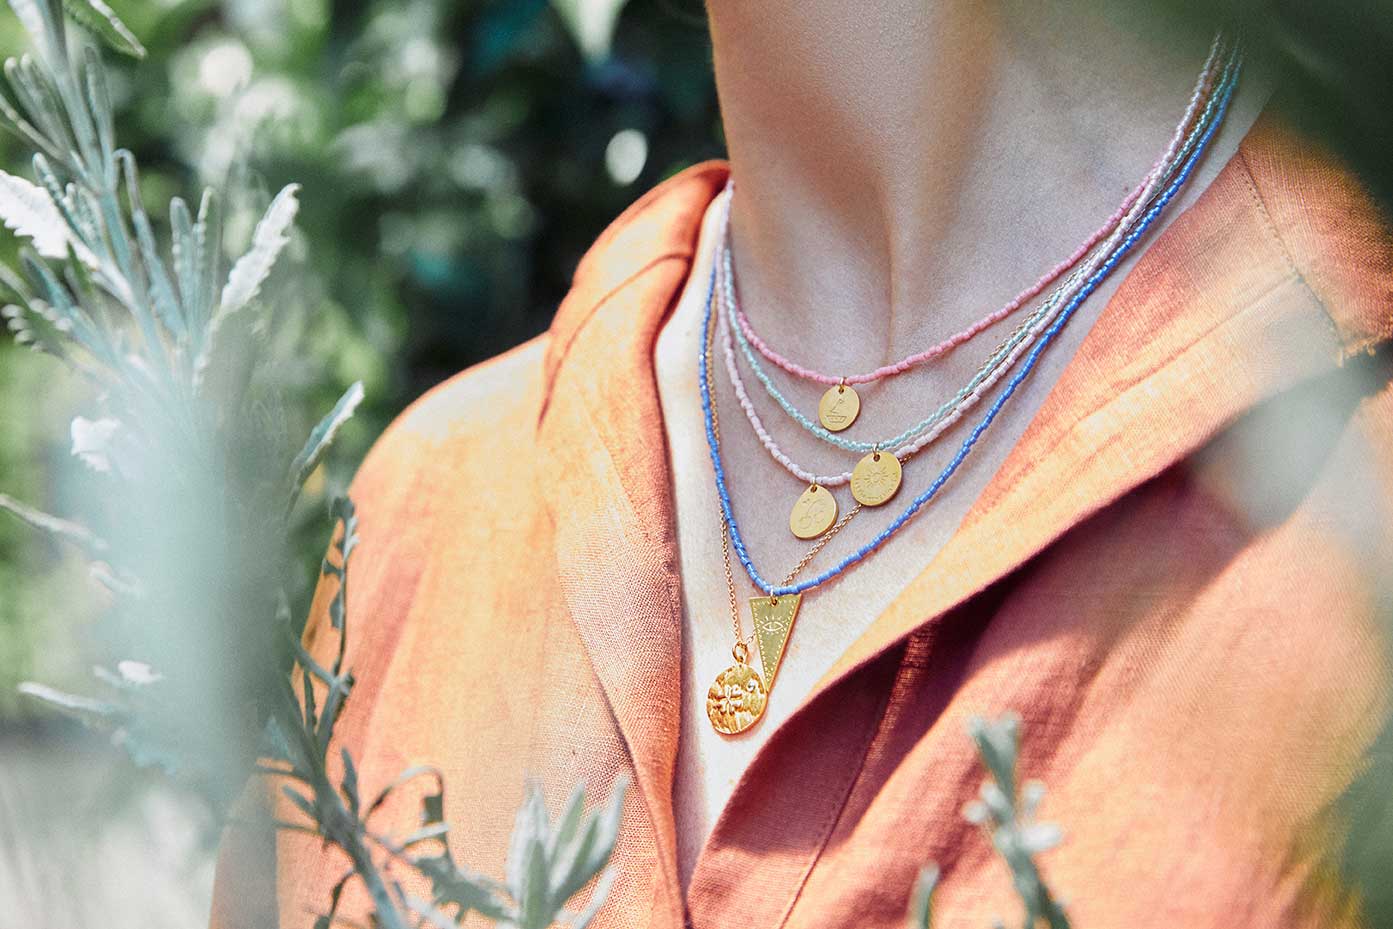 Emily Koliandri is wearing a combo of 5 different necklaces with miyuki beads, silver 925 gold plated chain and silver 925 gold plated charms in various shapes.